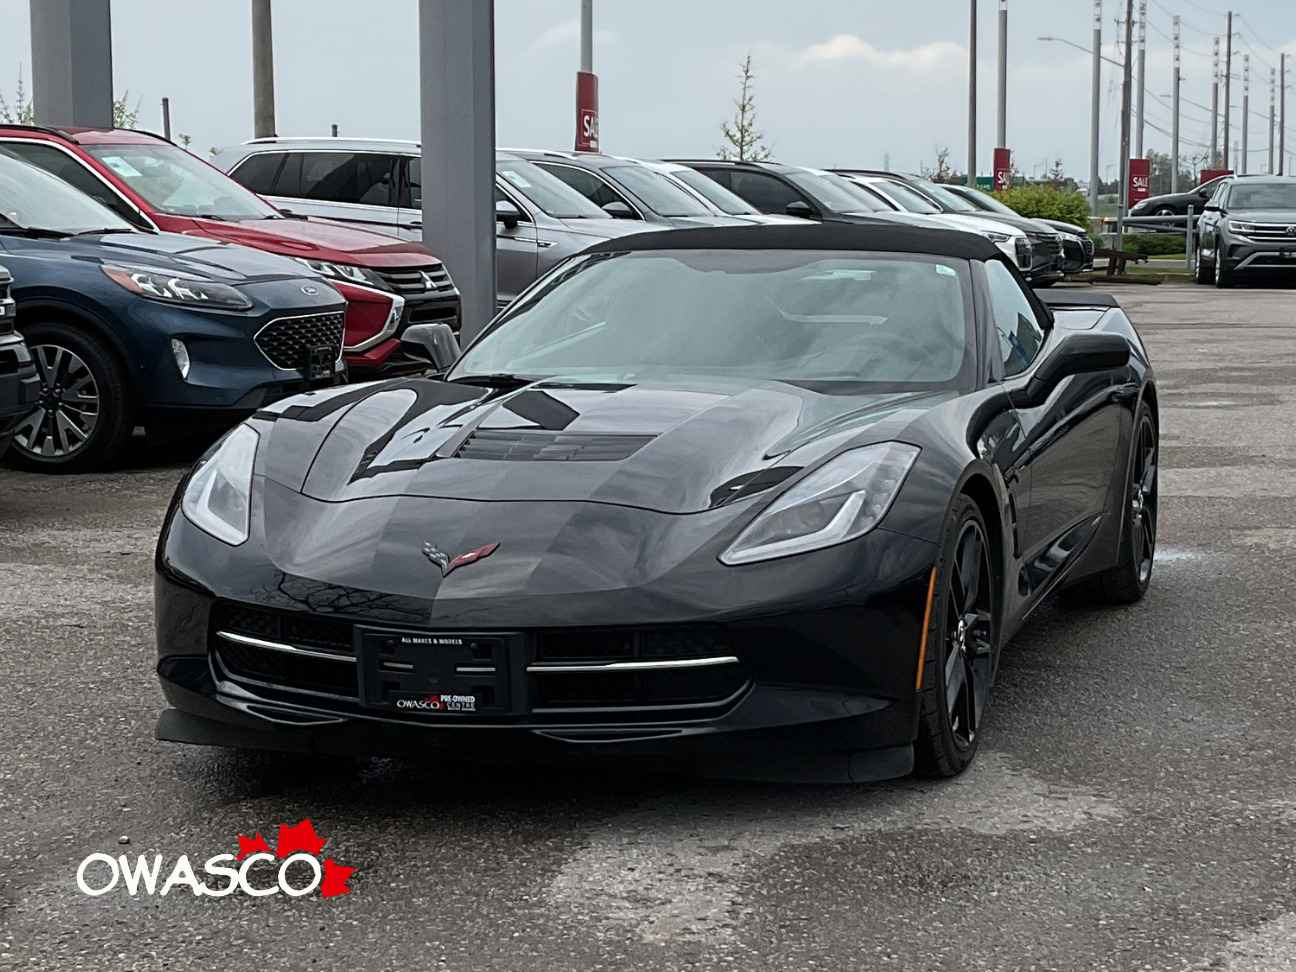 2015 Chevrolet Corvette 6.2L Ready For Summer! Convertible! Leather!